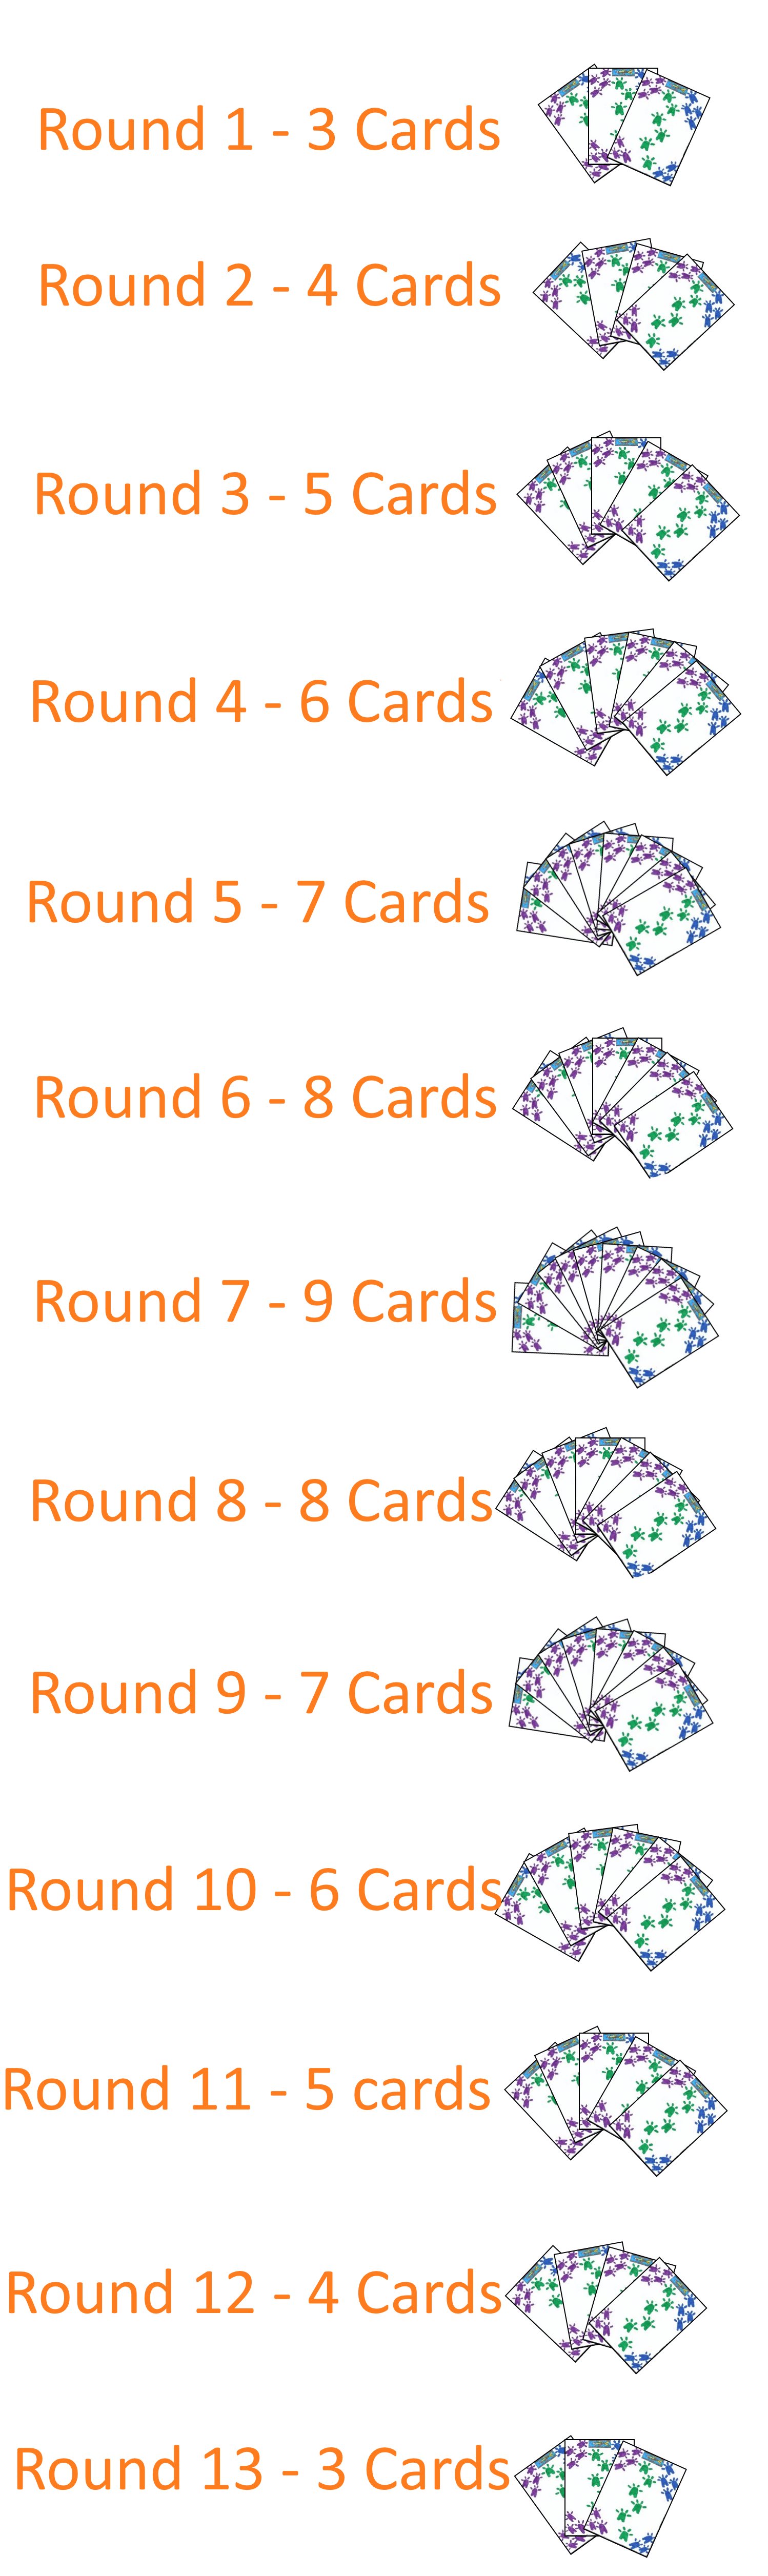 Number of cards in each round of Jabberwocky